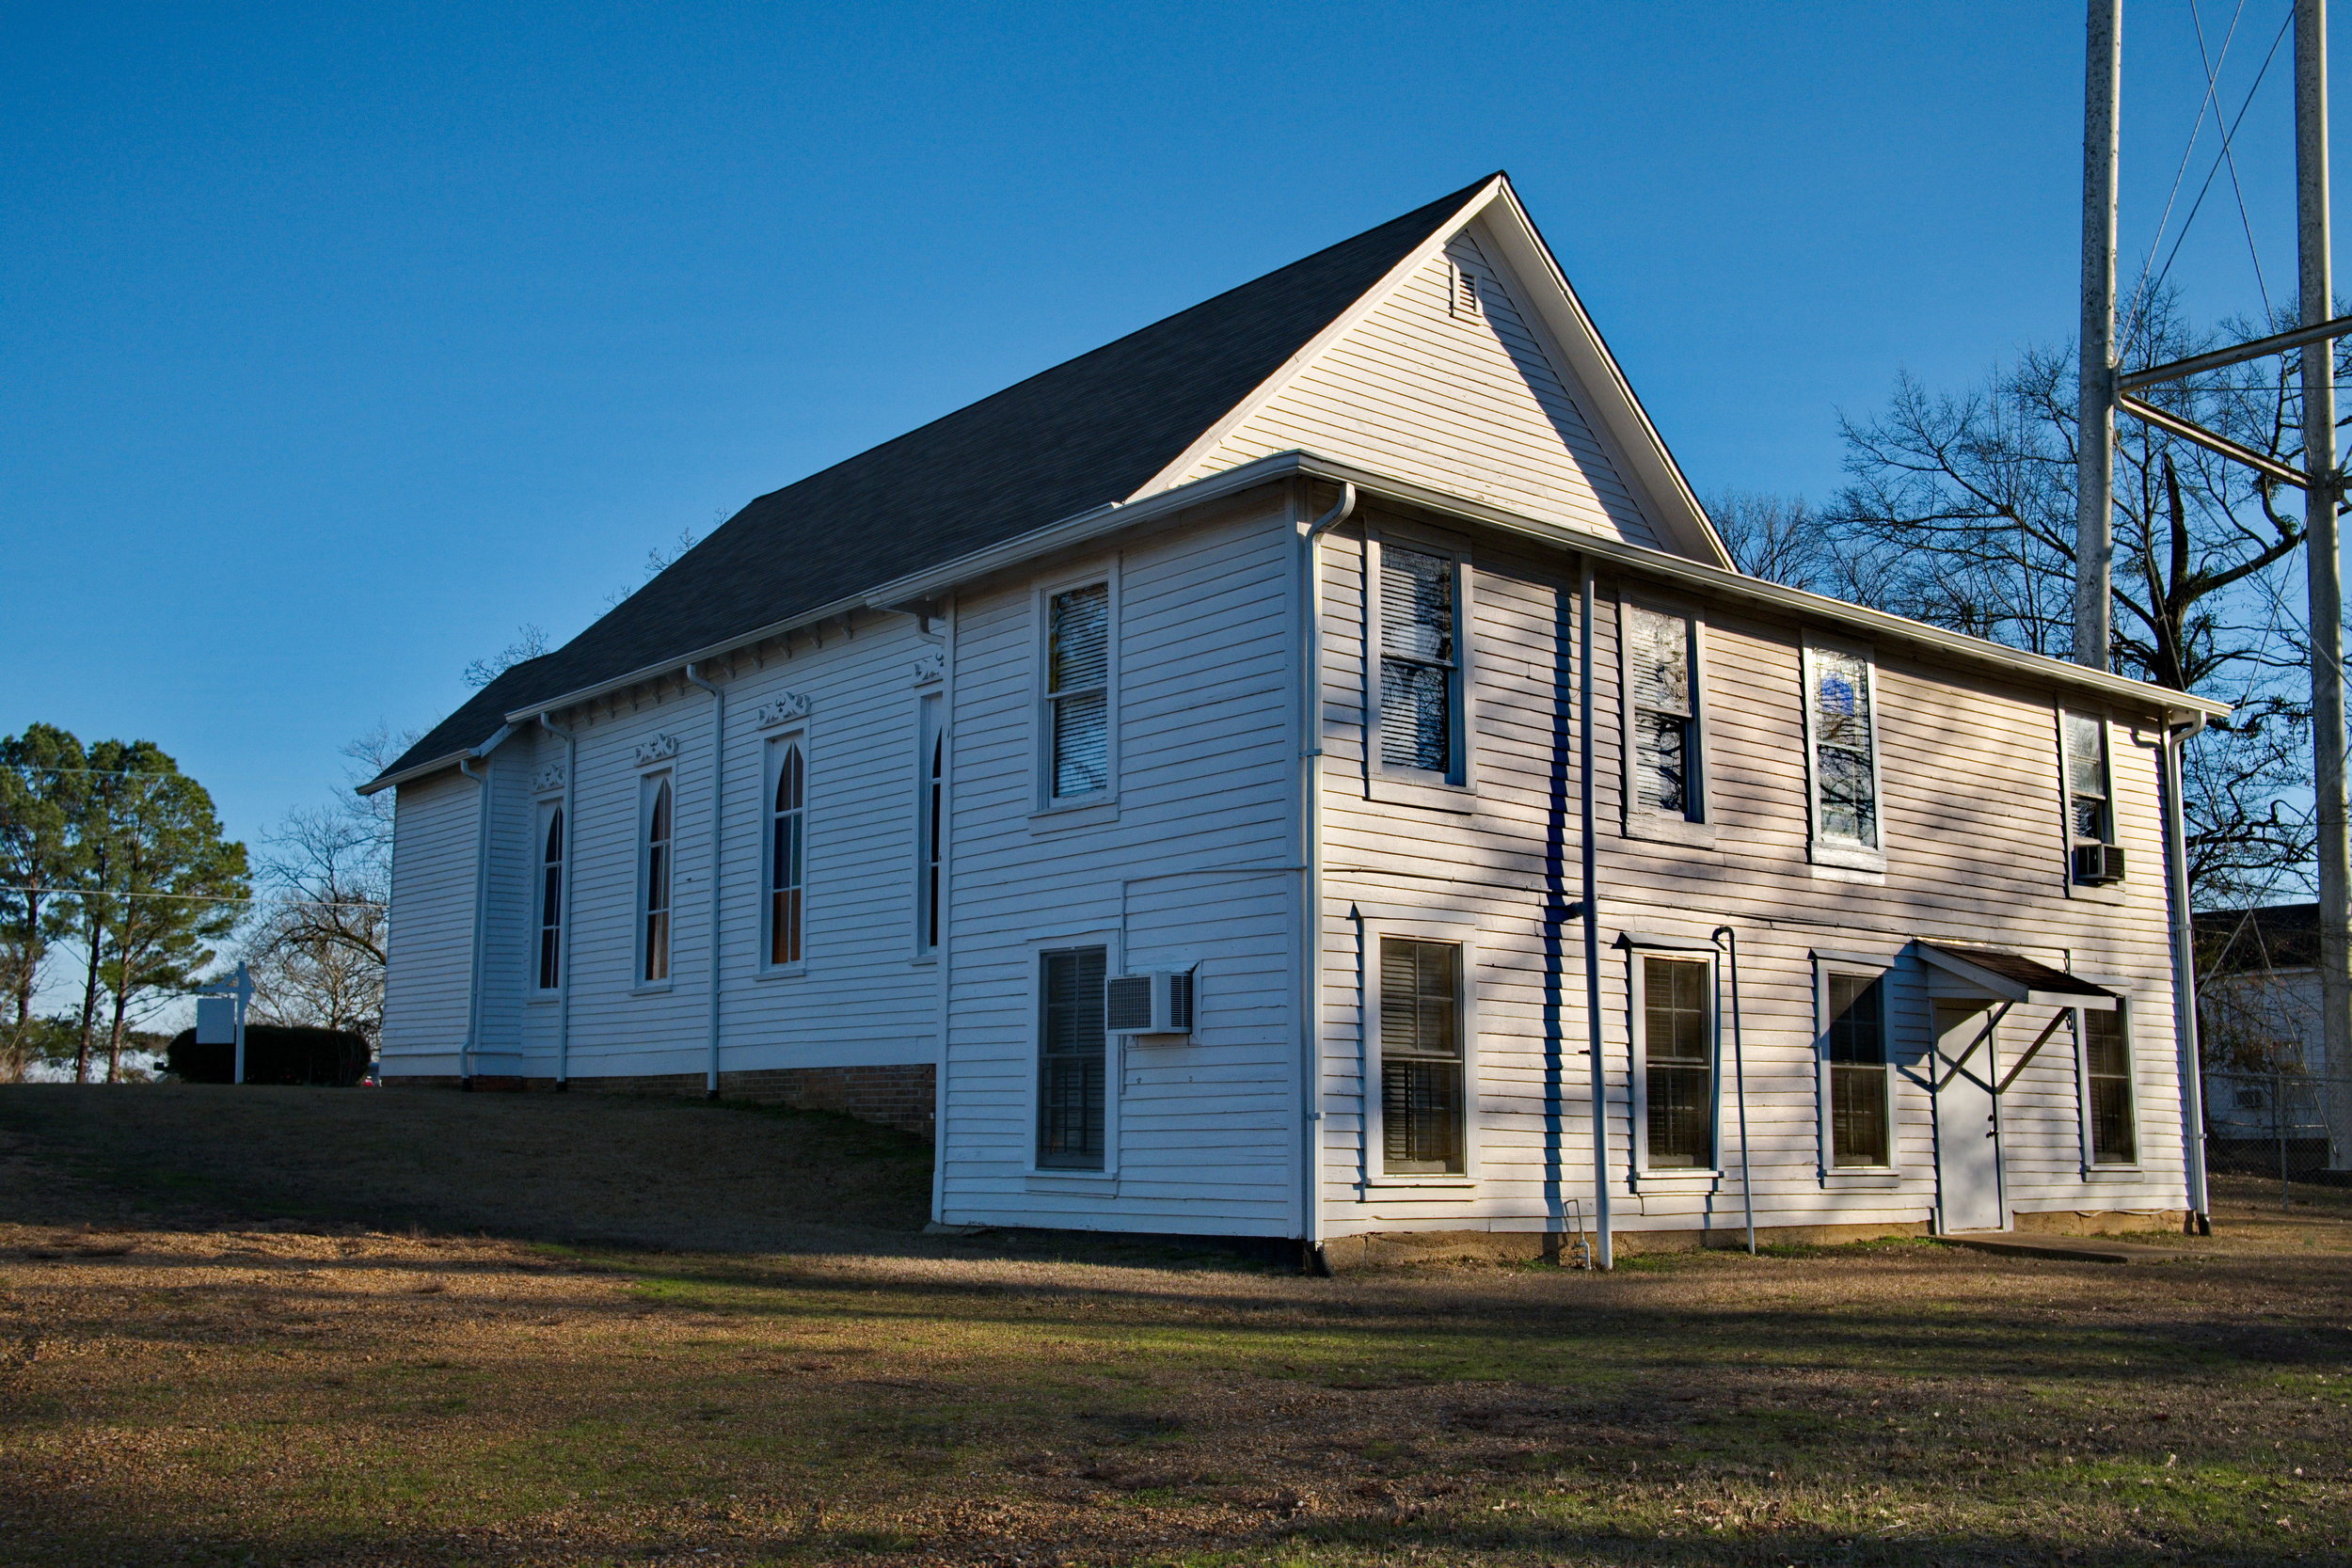  Old church building in West, Mississippi 